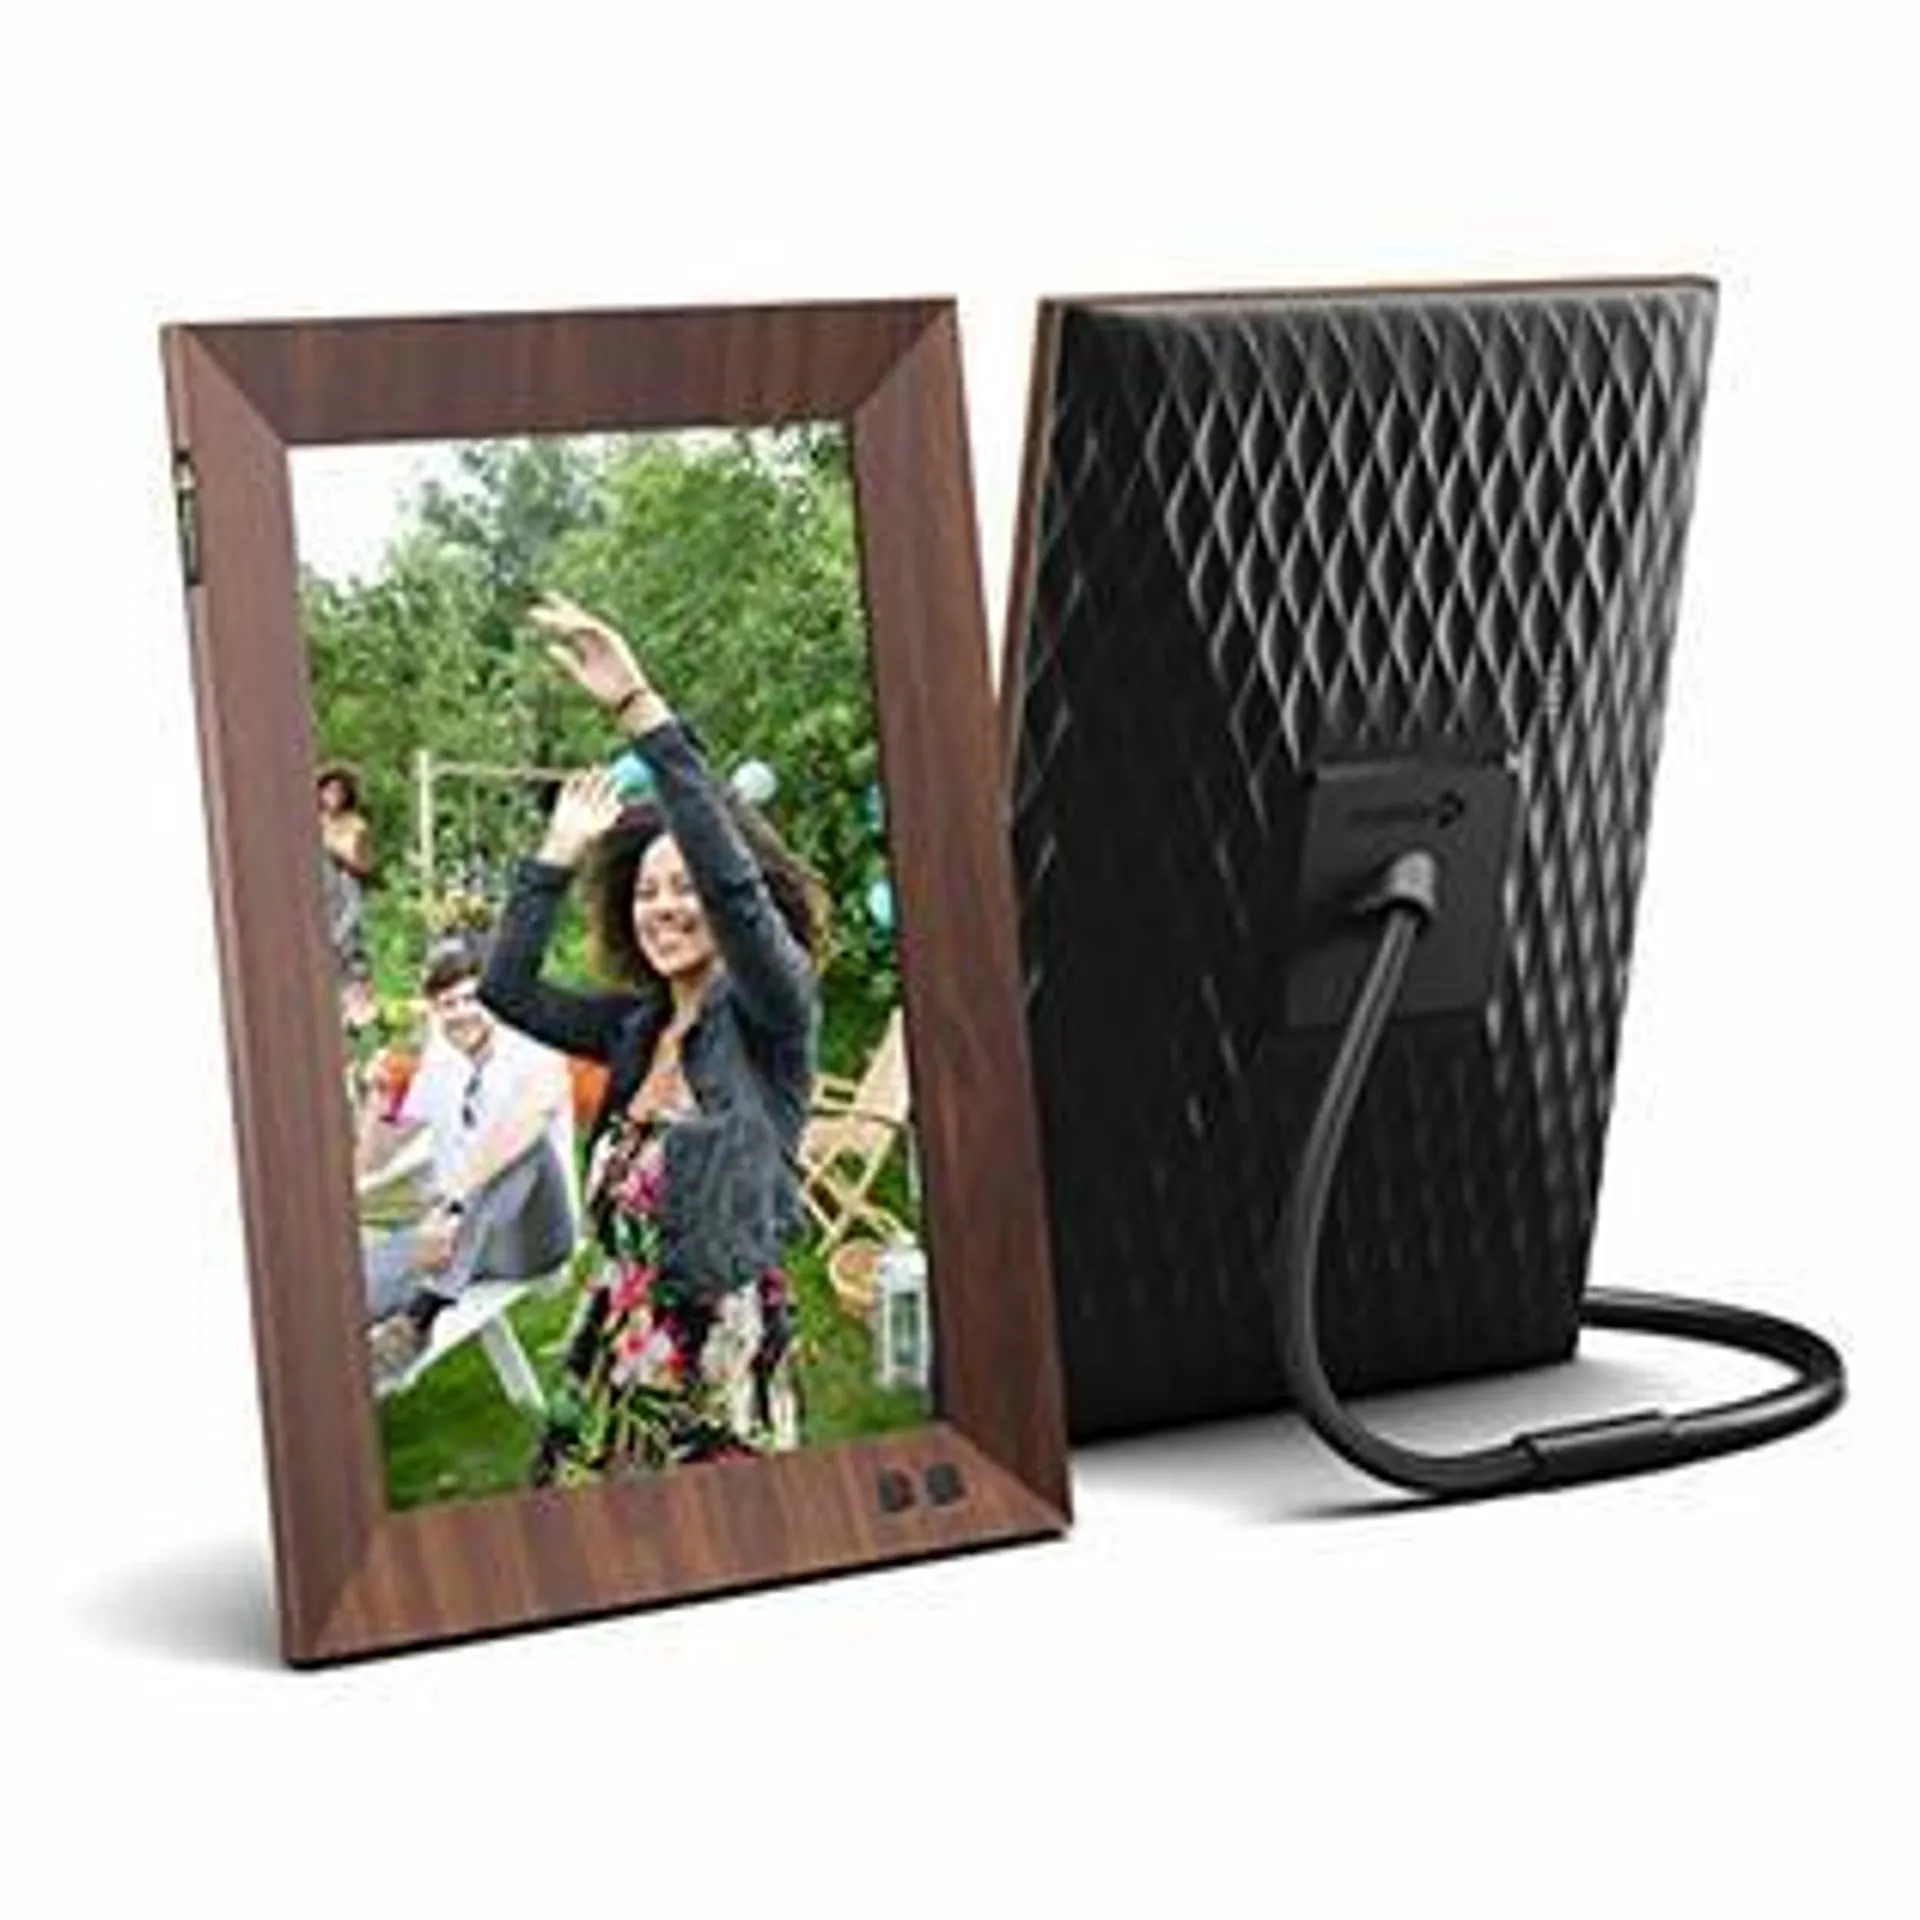 Nixplay Smart Digital Picture Frame 10.1 Inch Wood-Effect - Share Moments Instantly via EMail or App